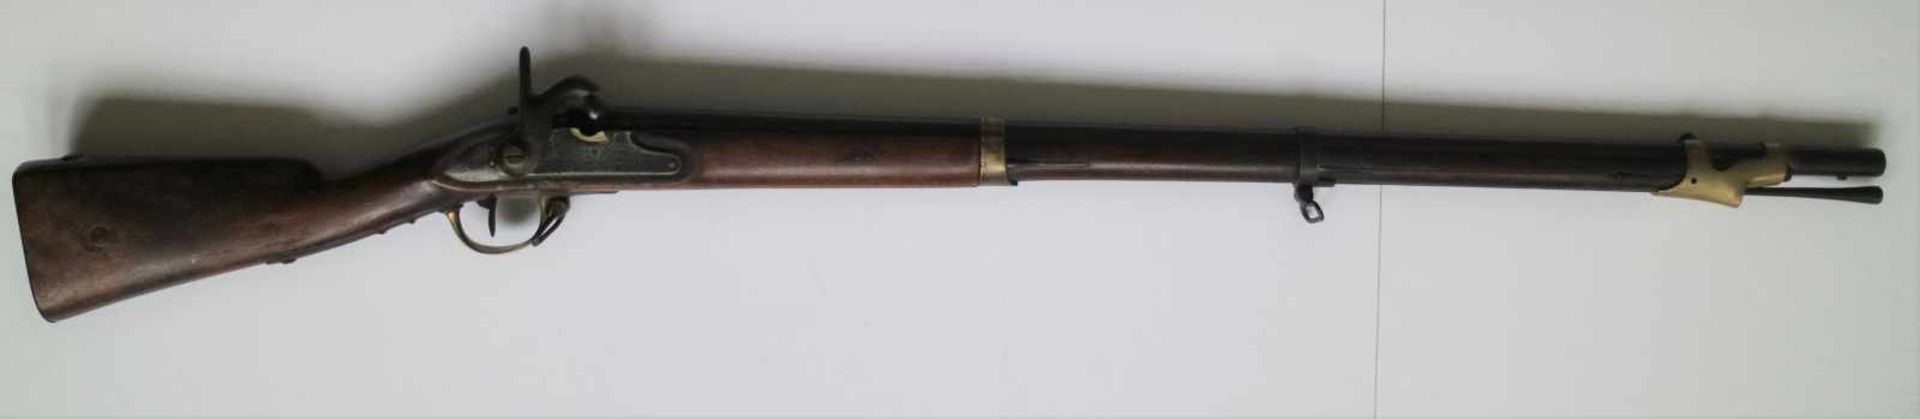 French military percussion riflesigned manufacture Royal à St EtienneL 130 cm